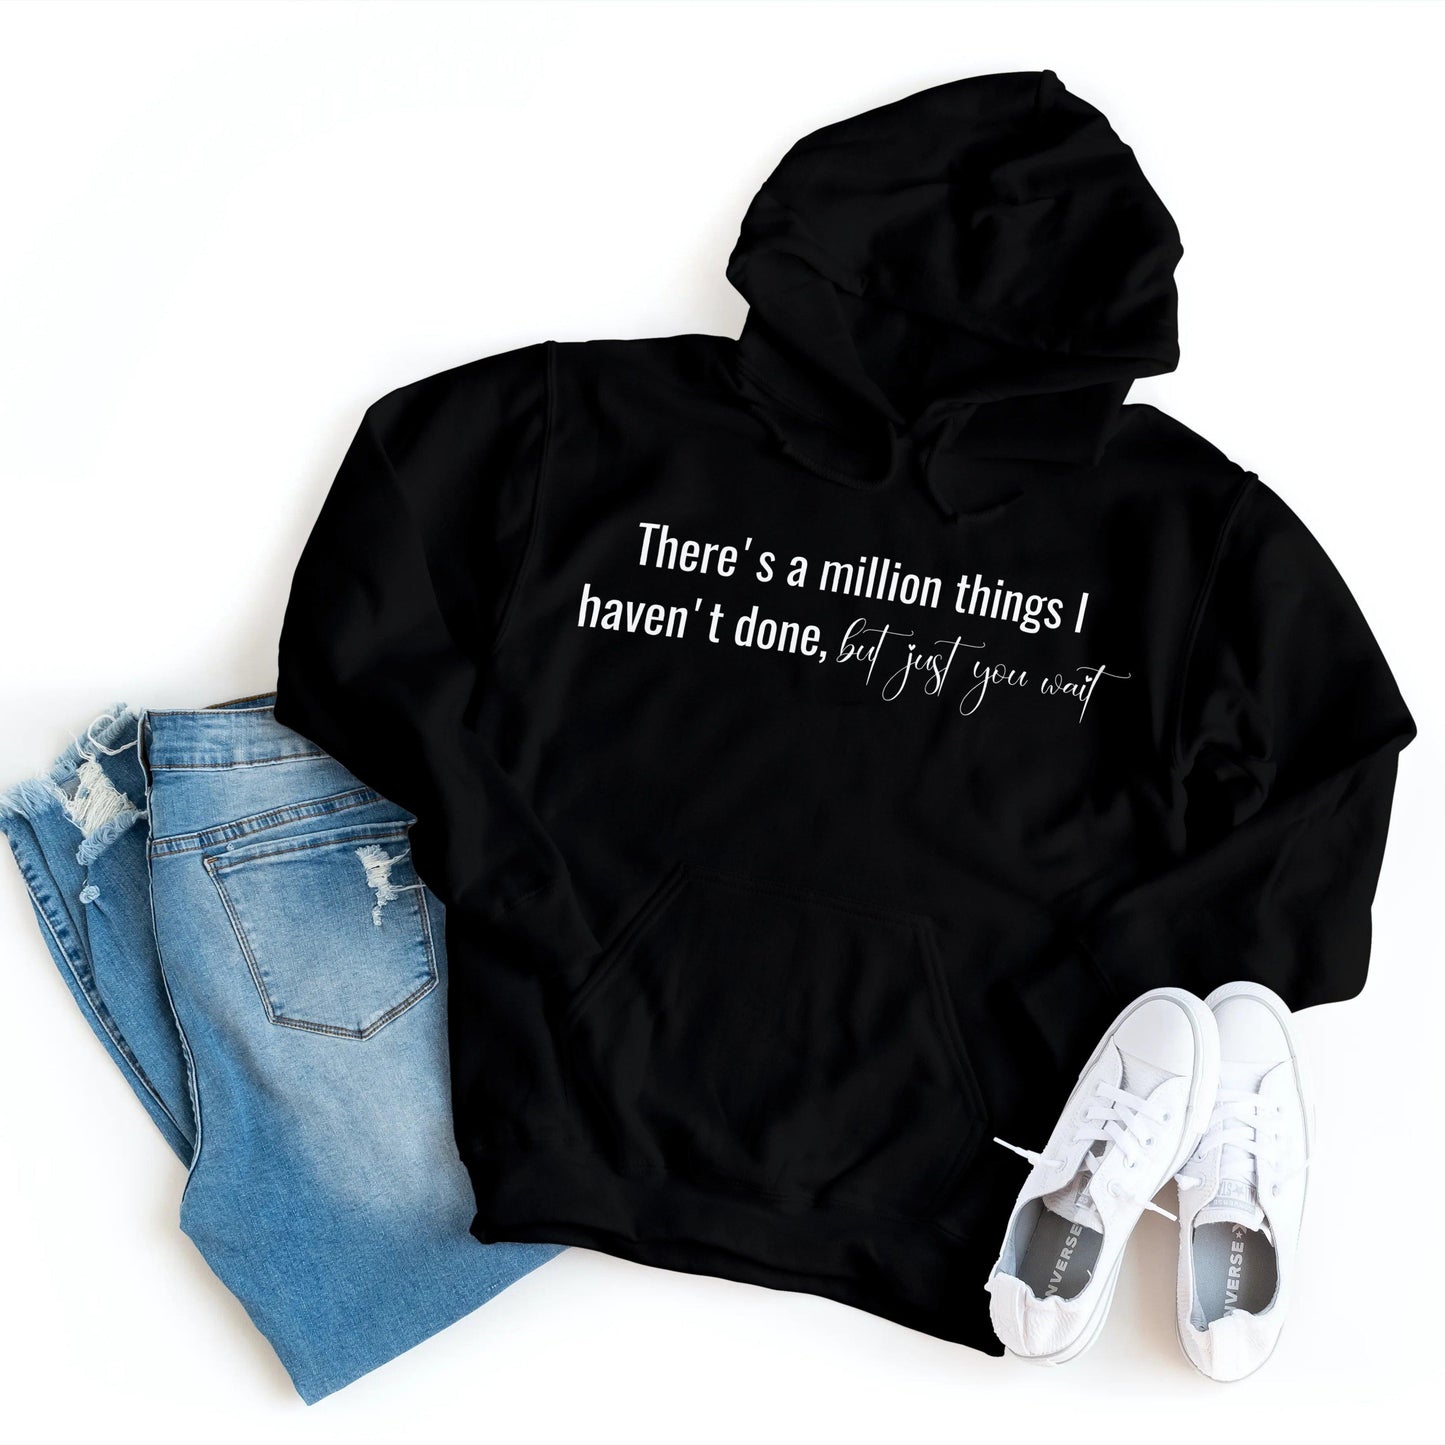 Hamilton - There's A Million Things I Haven't Done, But Just You Wait - Hoodie - Healthy Wealthy Skinny